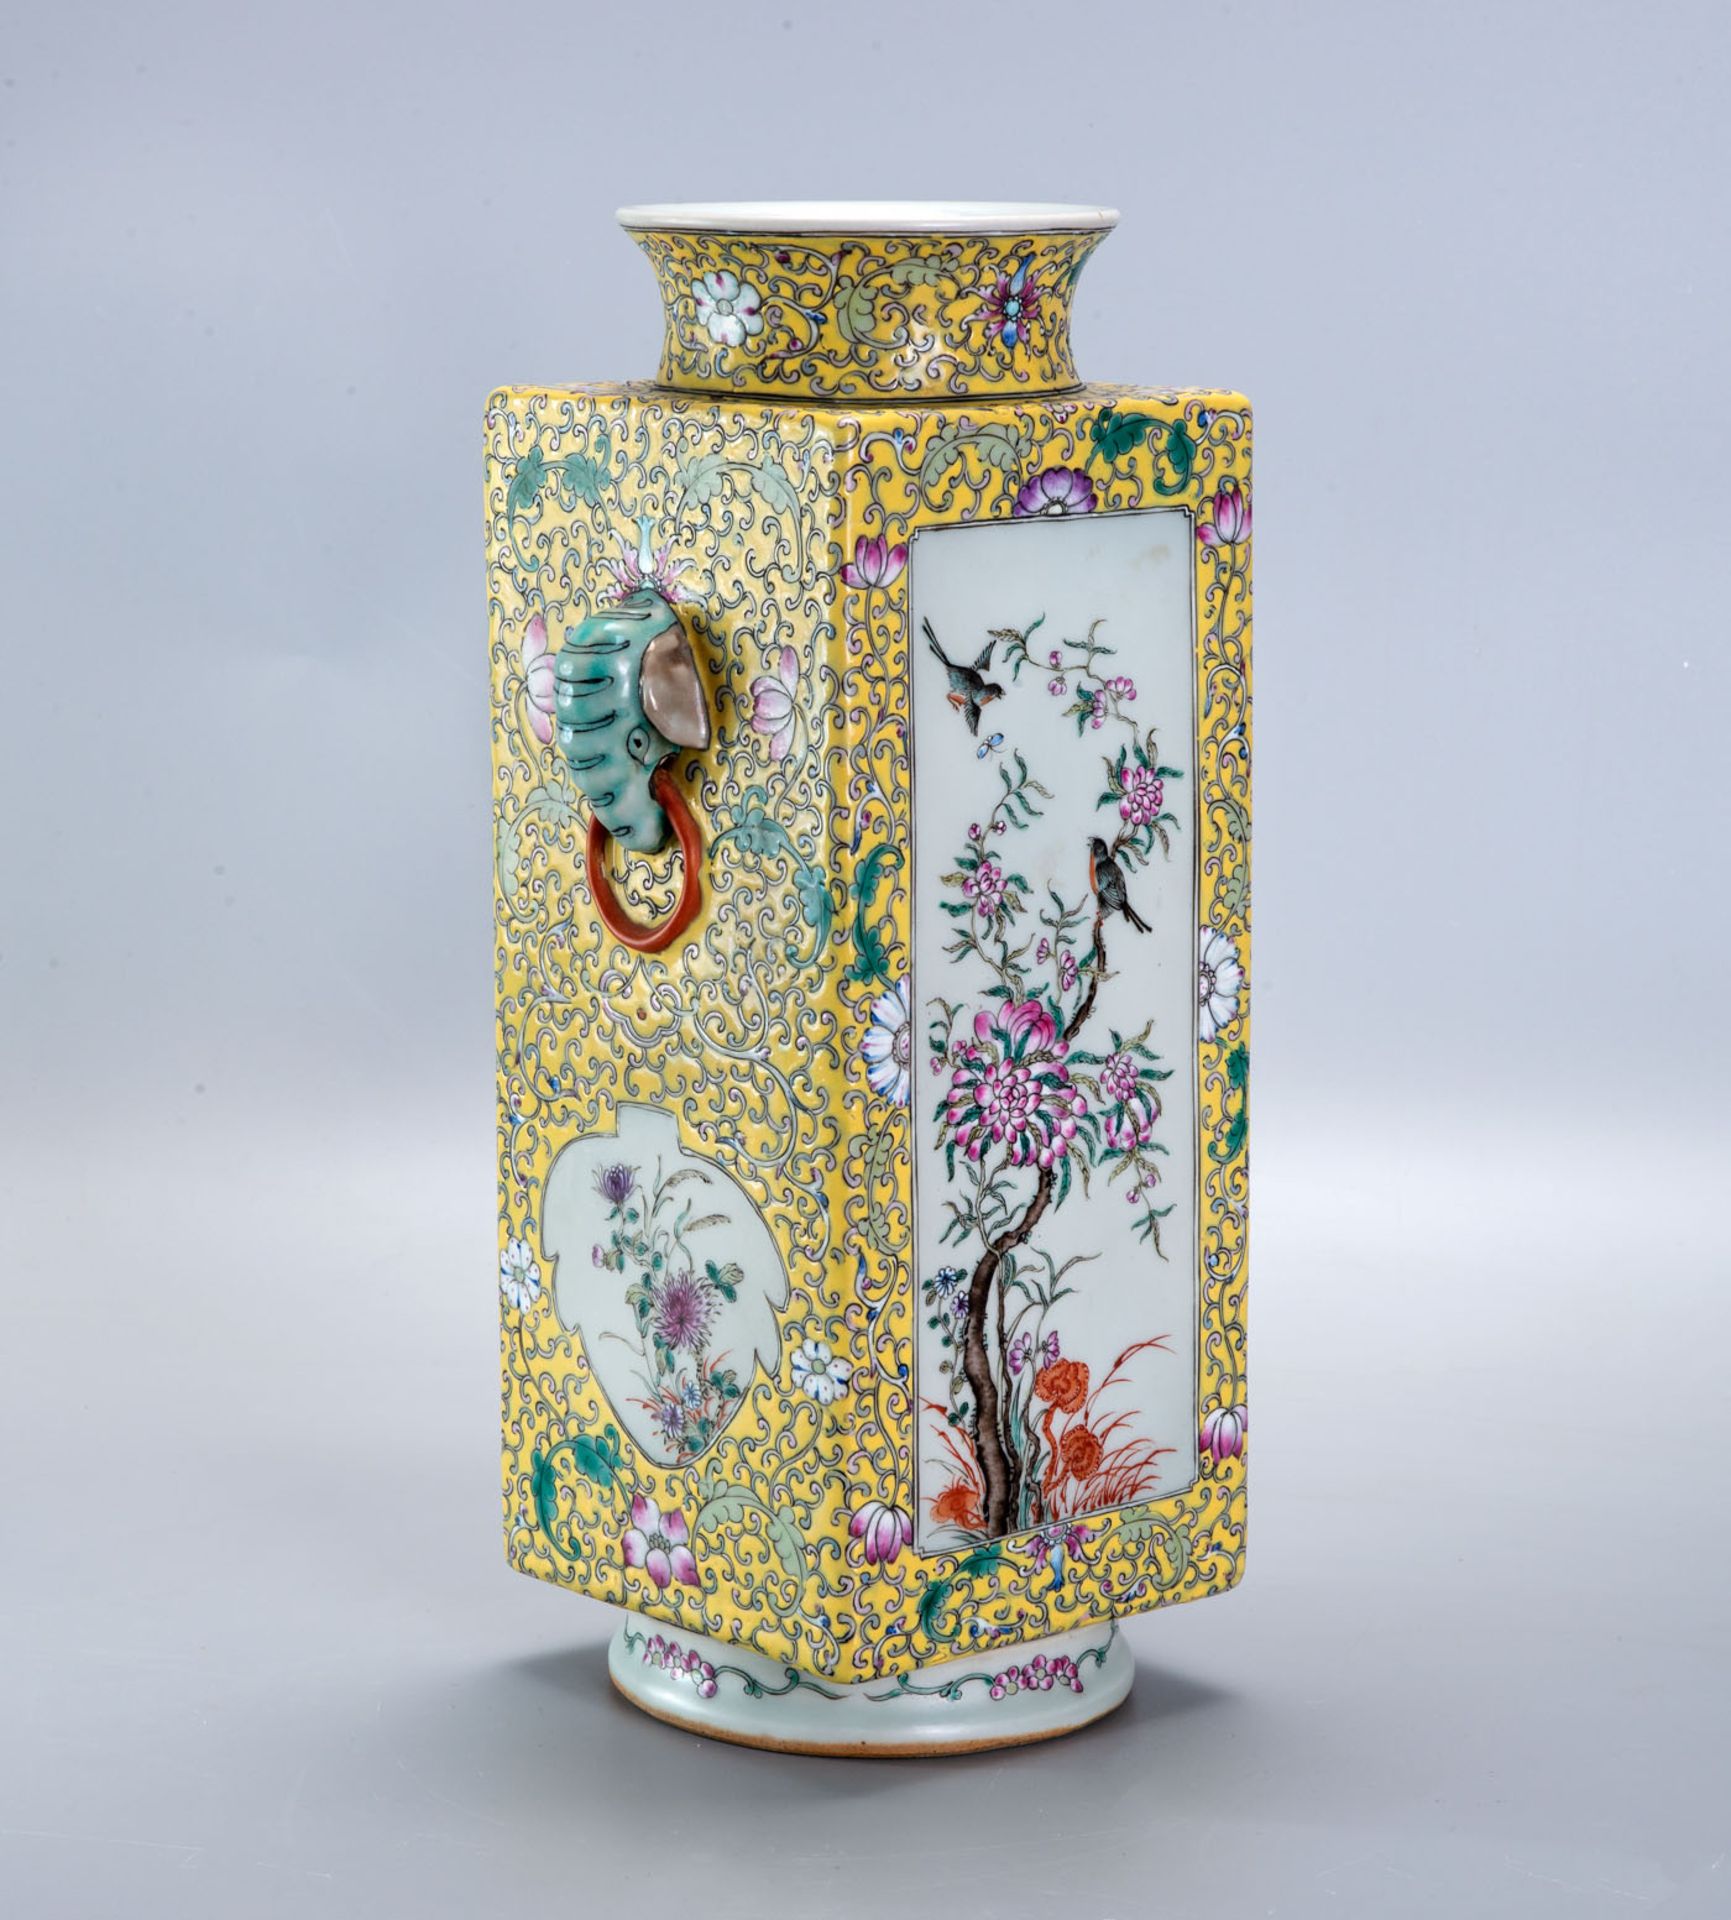 A Fine Imperial Porcelain Vase, China, Hsien Feng (1851-1861) Mark and and Period